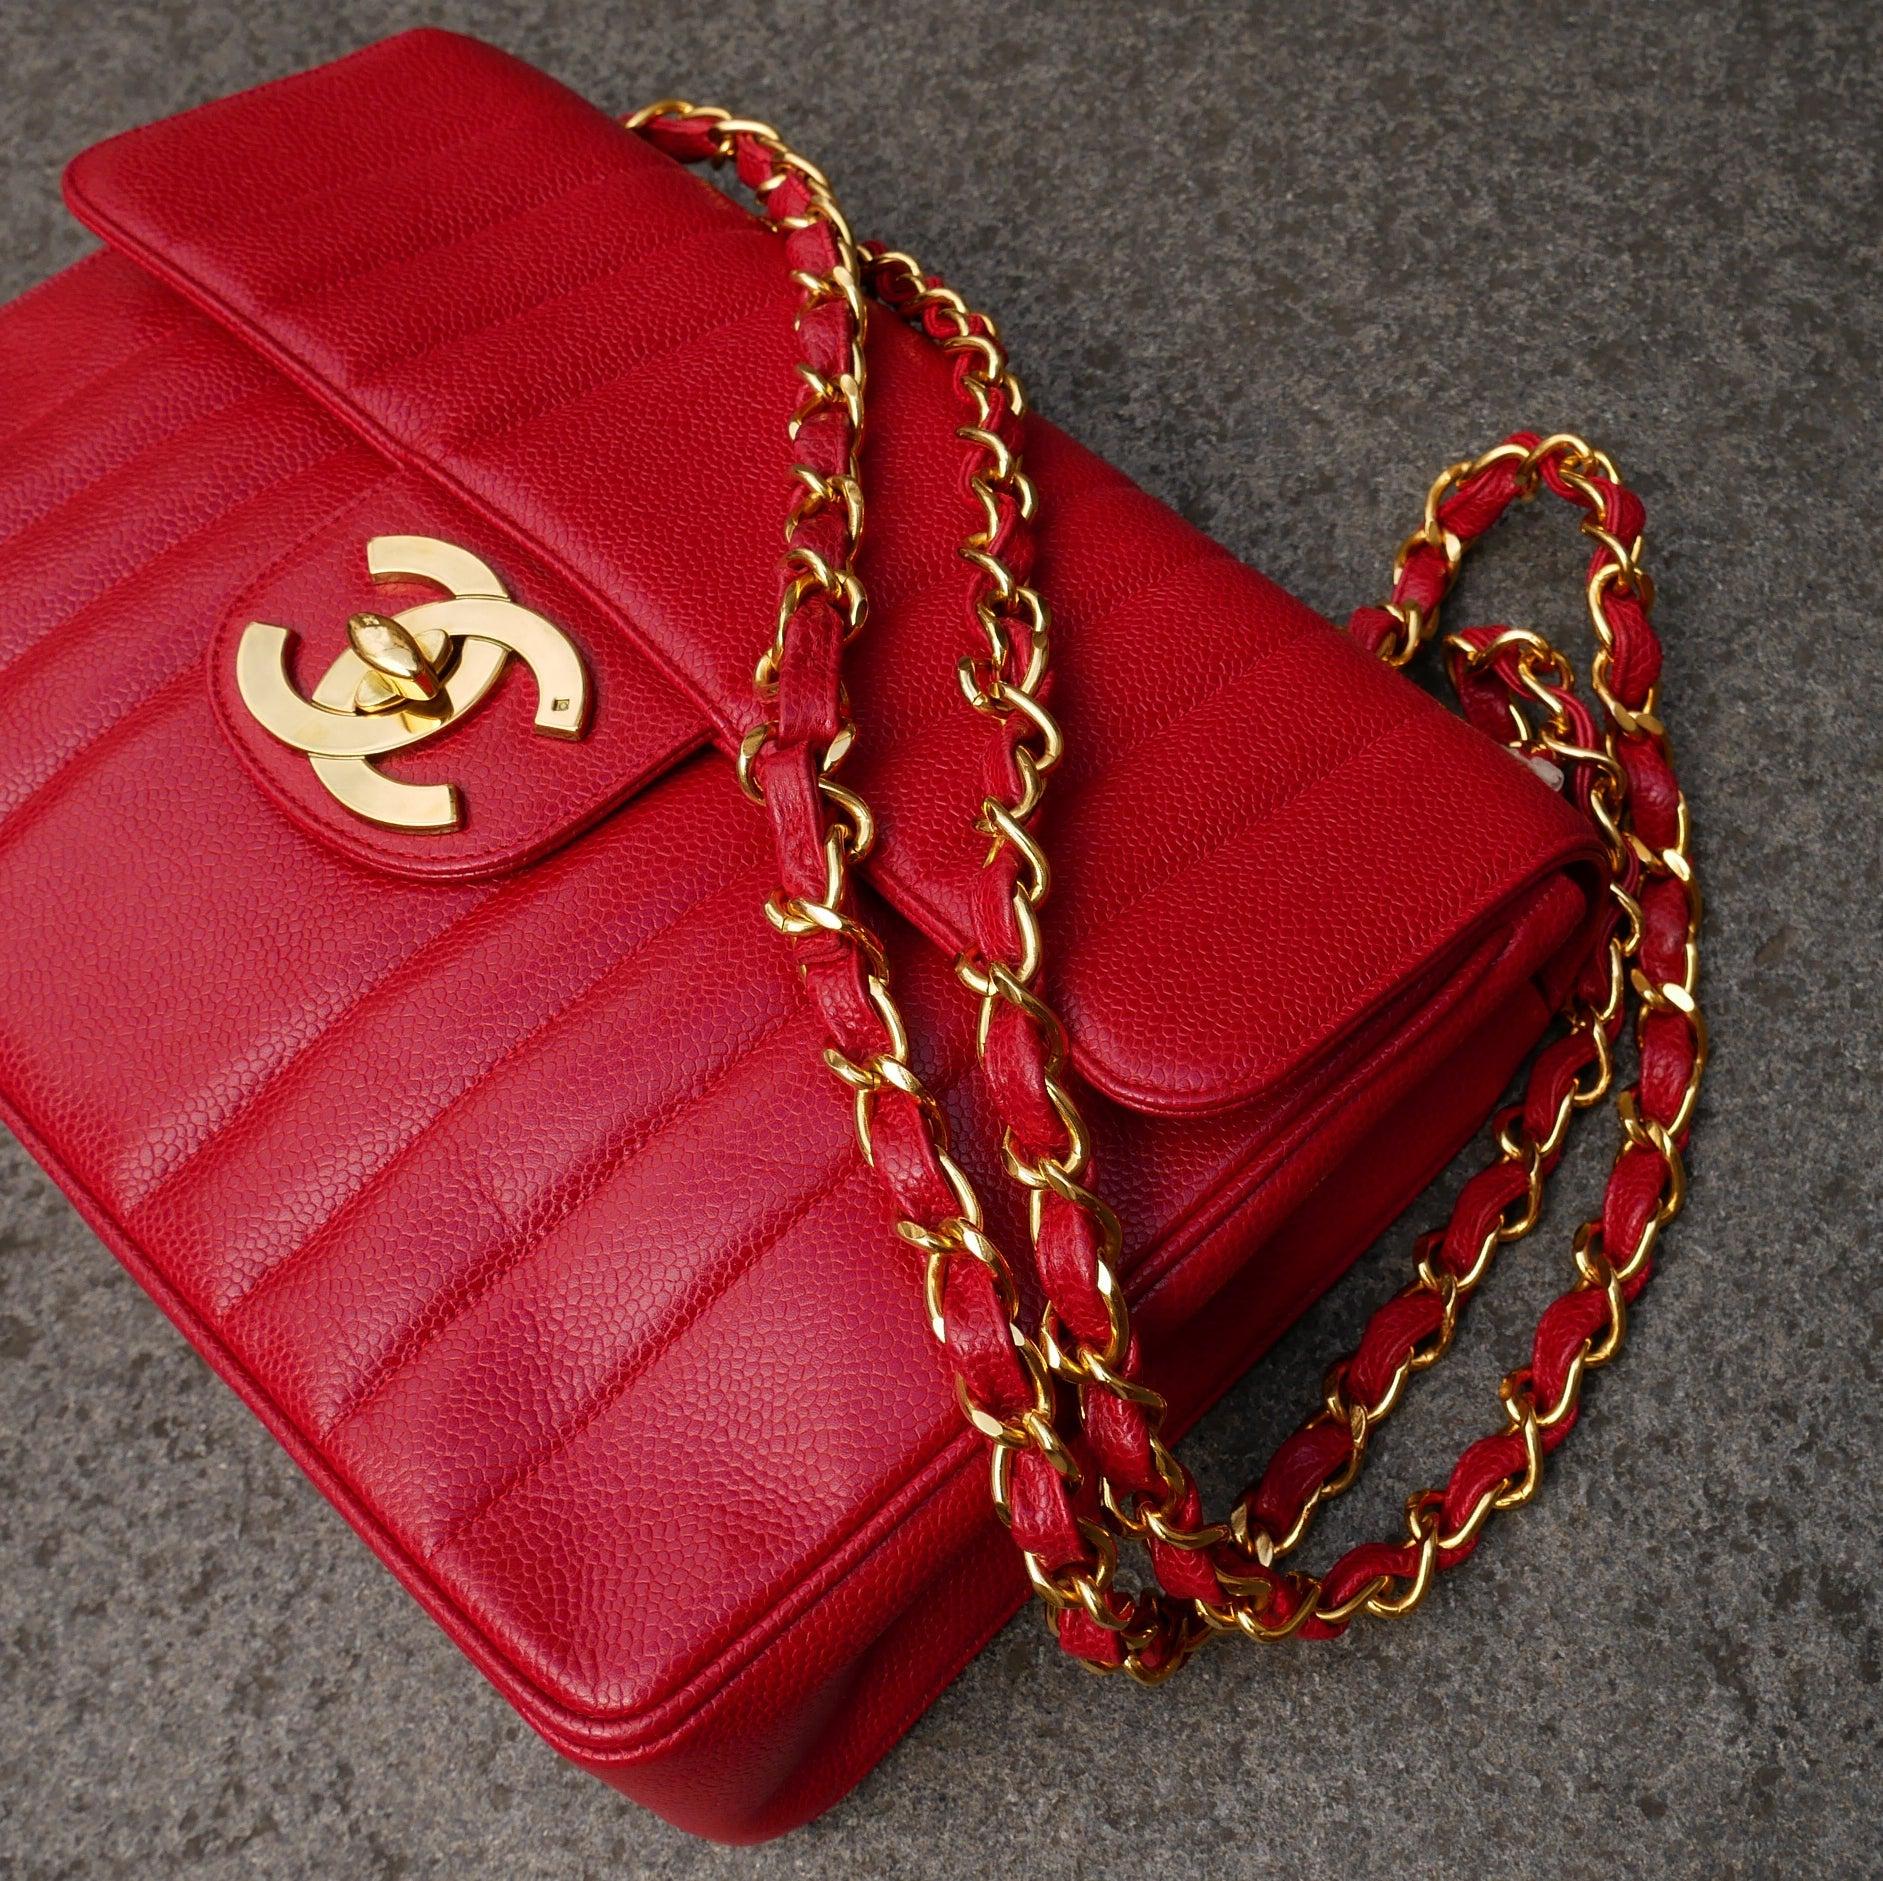 Chanel Classic Flap Jumbo Mademoiselle Chain Shoulder Bag Red Caviar Skin

Additional information:
Color / material : Red / Caviar Skin Leather
Accessories : Authenticity Seal(Peeled), Authenticity Card
Pocket : Outside: Pocket*1, Inside: Pocket*1,